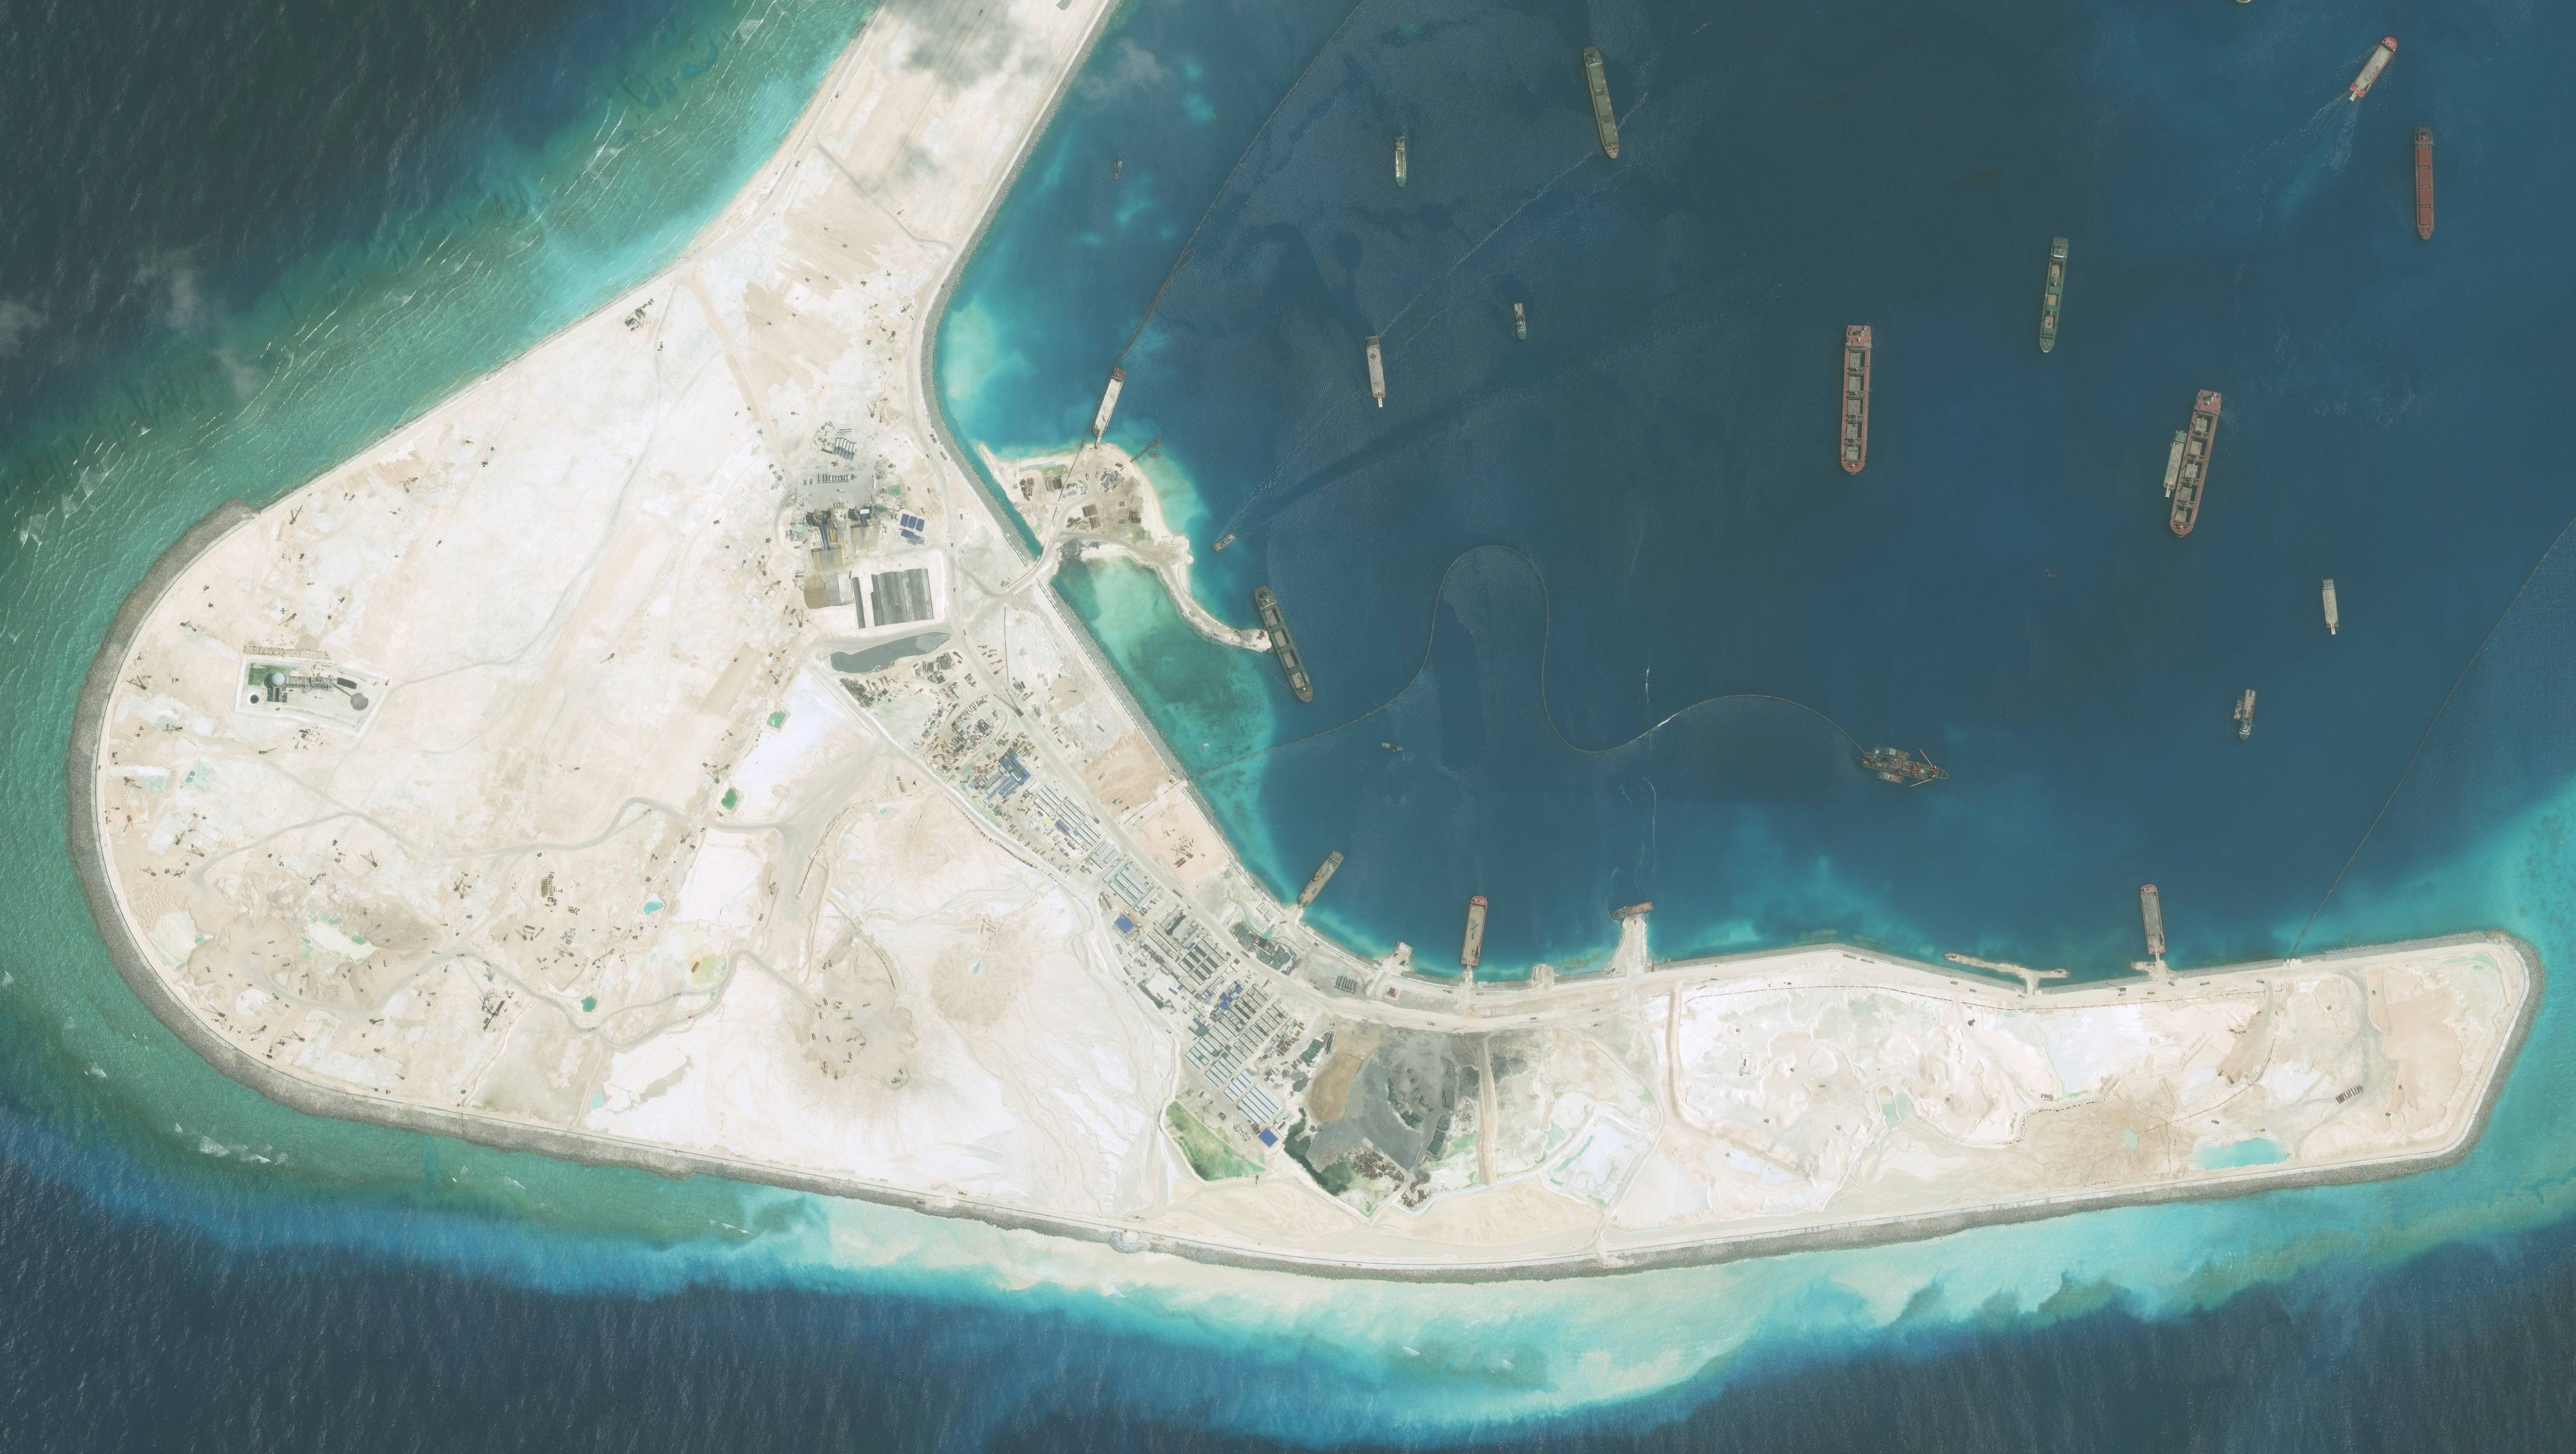 DigitalGlobe high-resolution imagery of the Subi Reef in the South China Sea, a part of the Spratly Islands group. Photo DigitalGlobe via Getty Images.